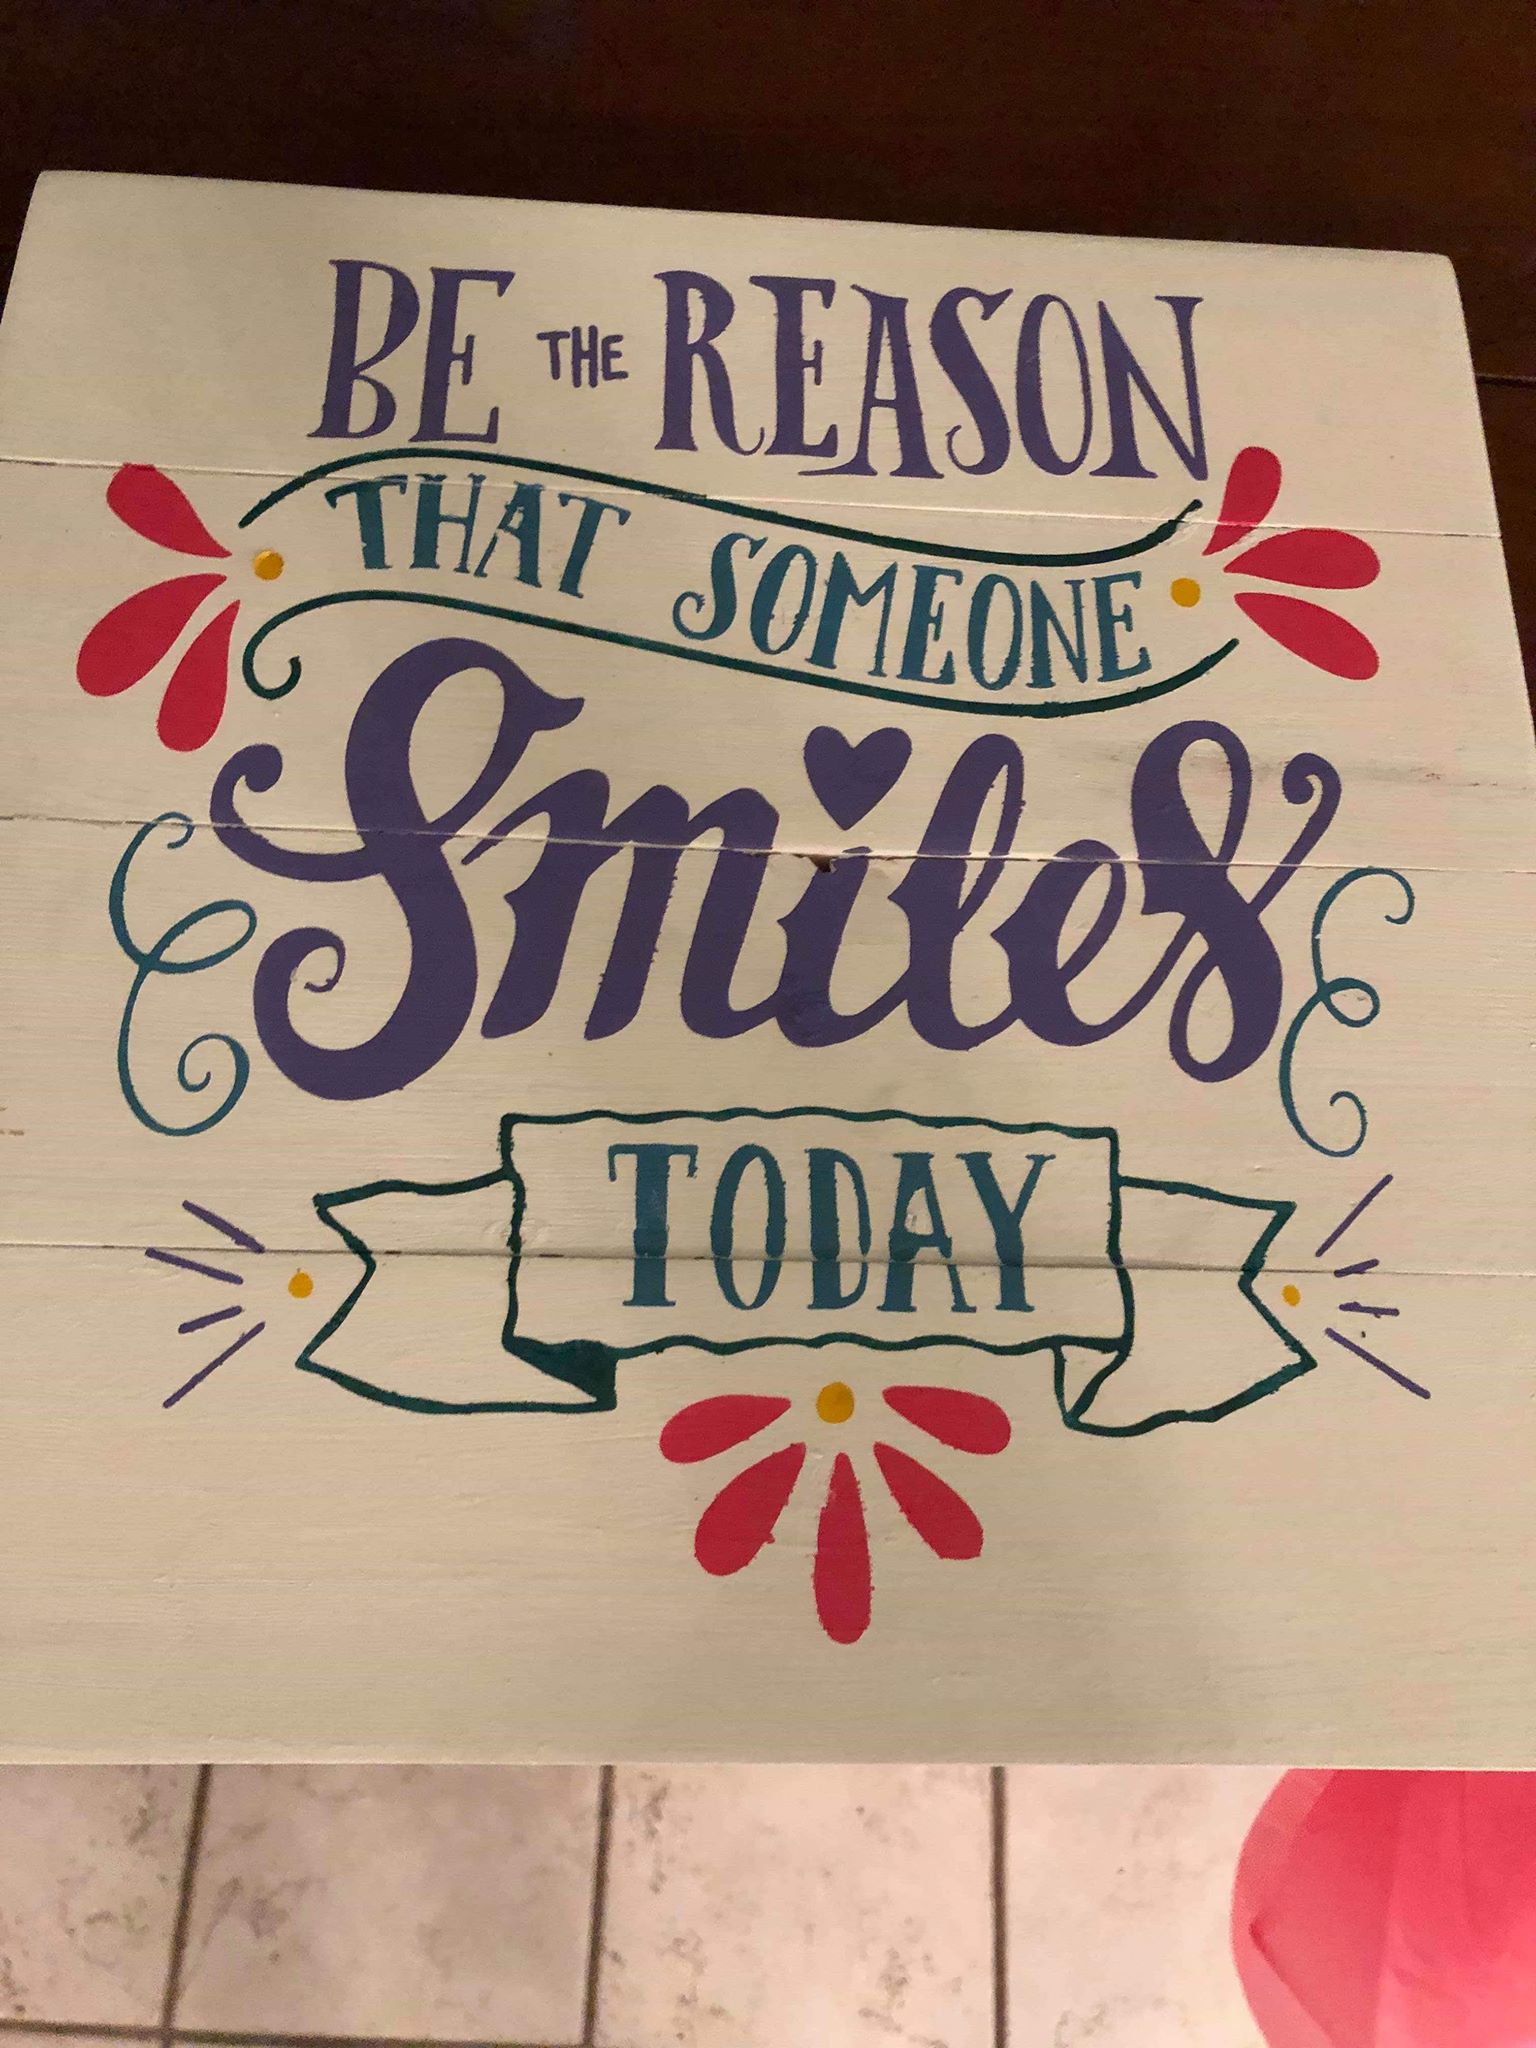 Be the reason that someone smiles today